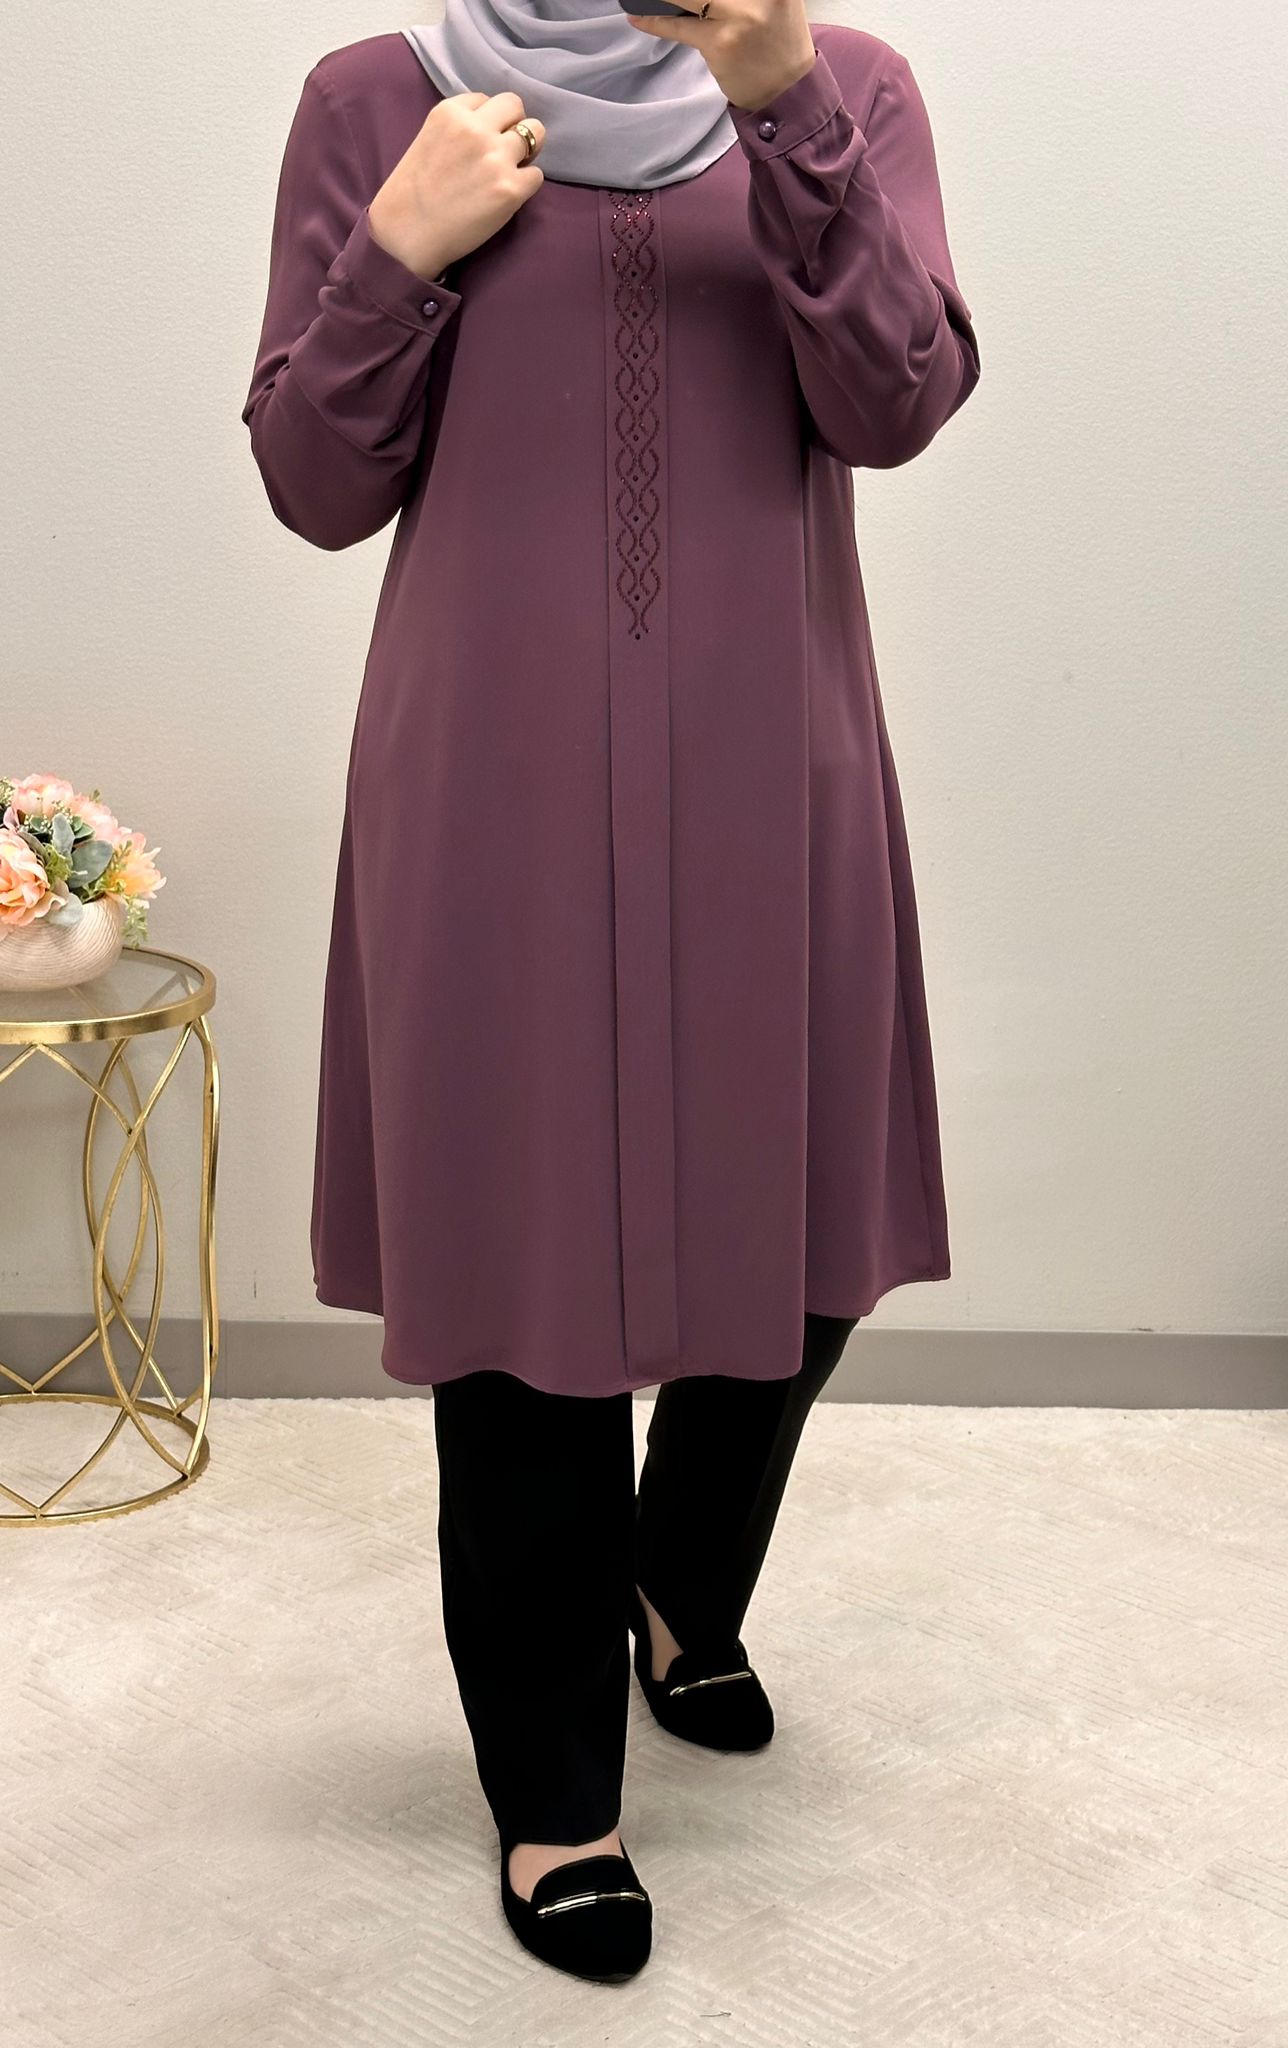 Modest Tunic blouse front strass embellished